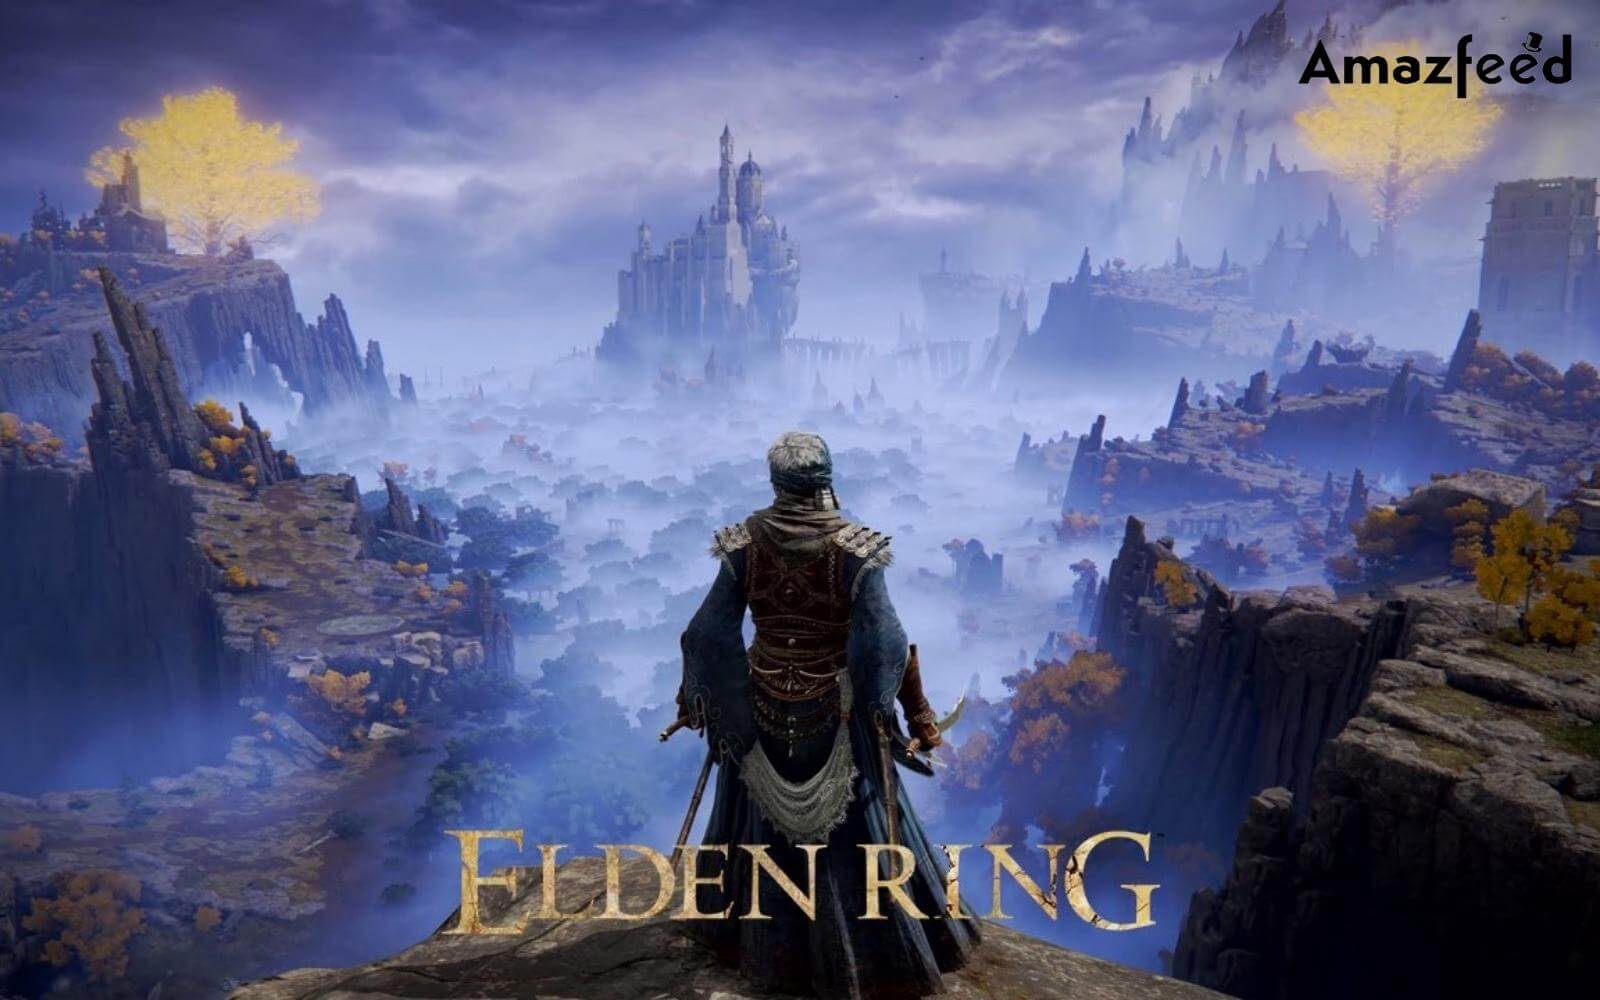 Find Maliketh - The Black Blade in Elden Ring | How to defeat Maliketh